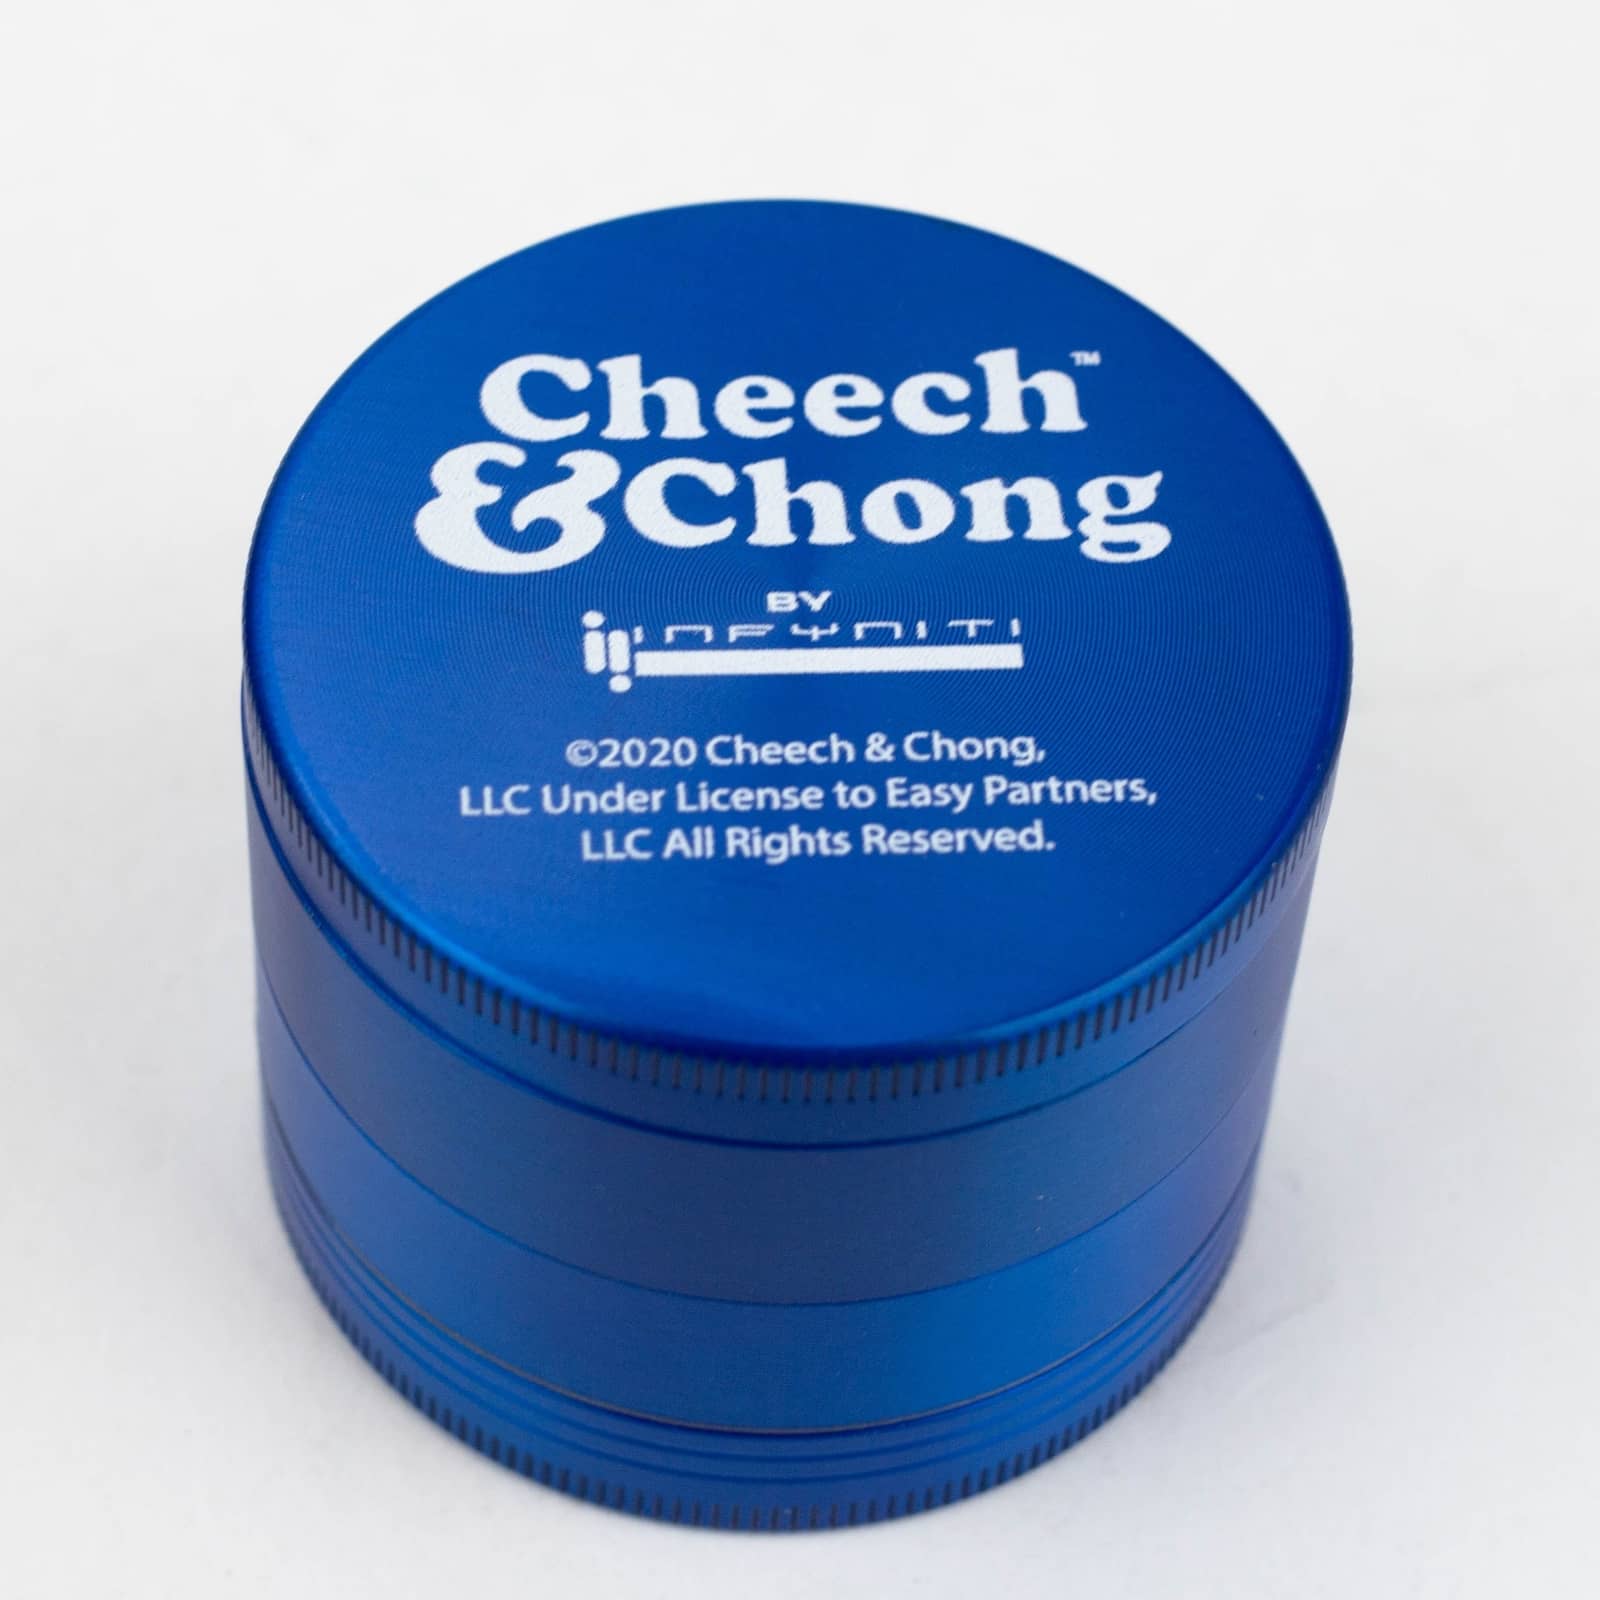 Cheech and Chong 4 Parts Metal Grinder blue up in somke